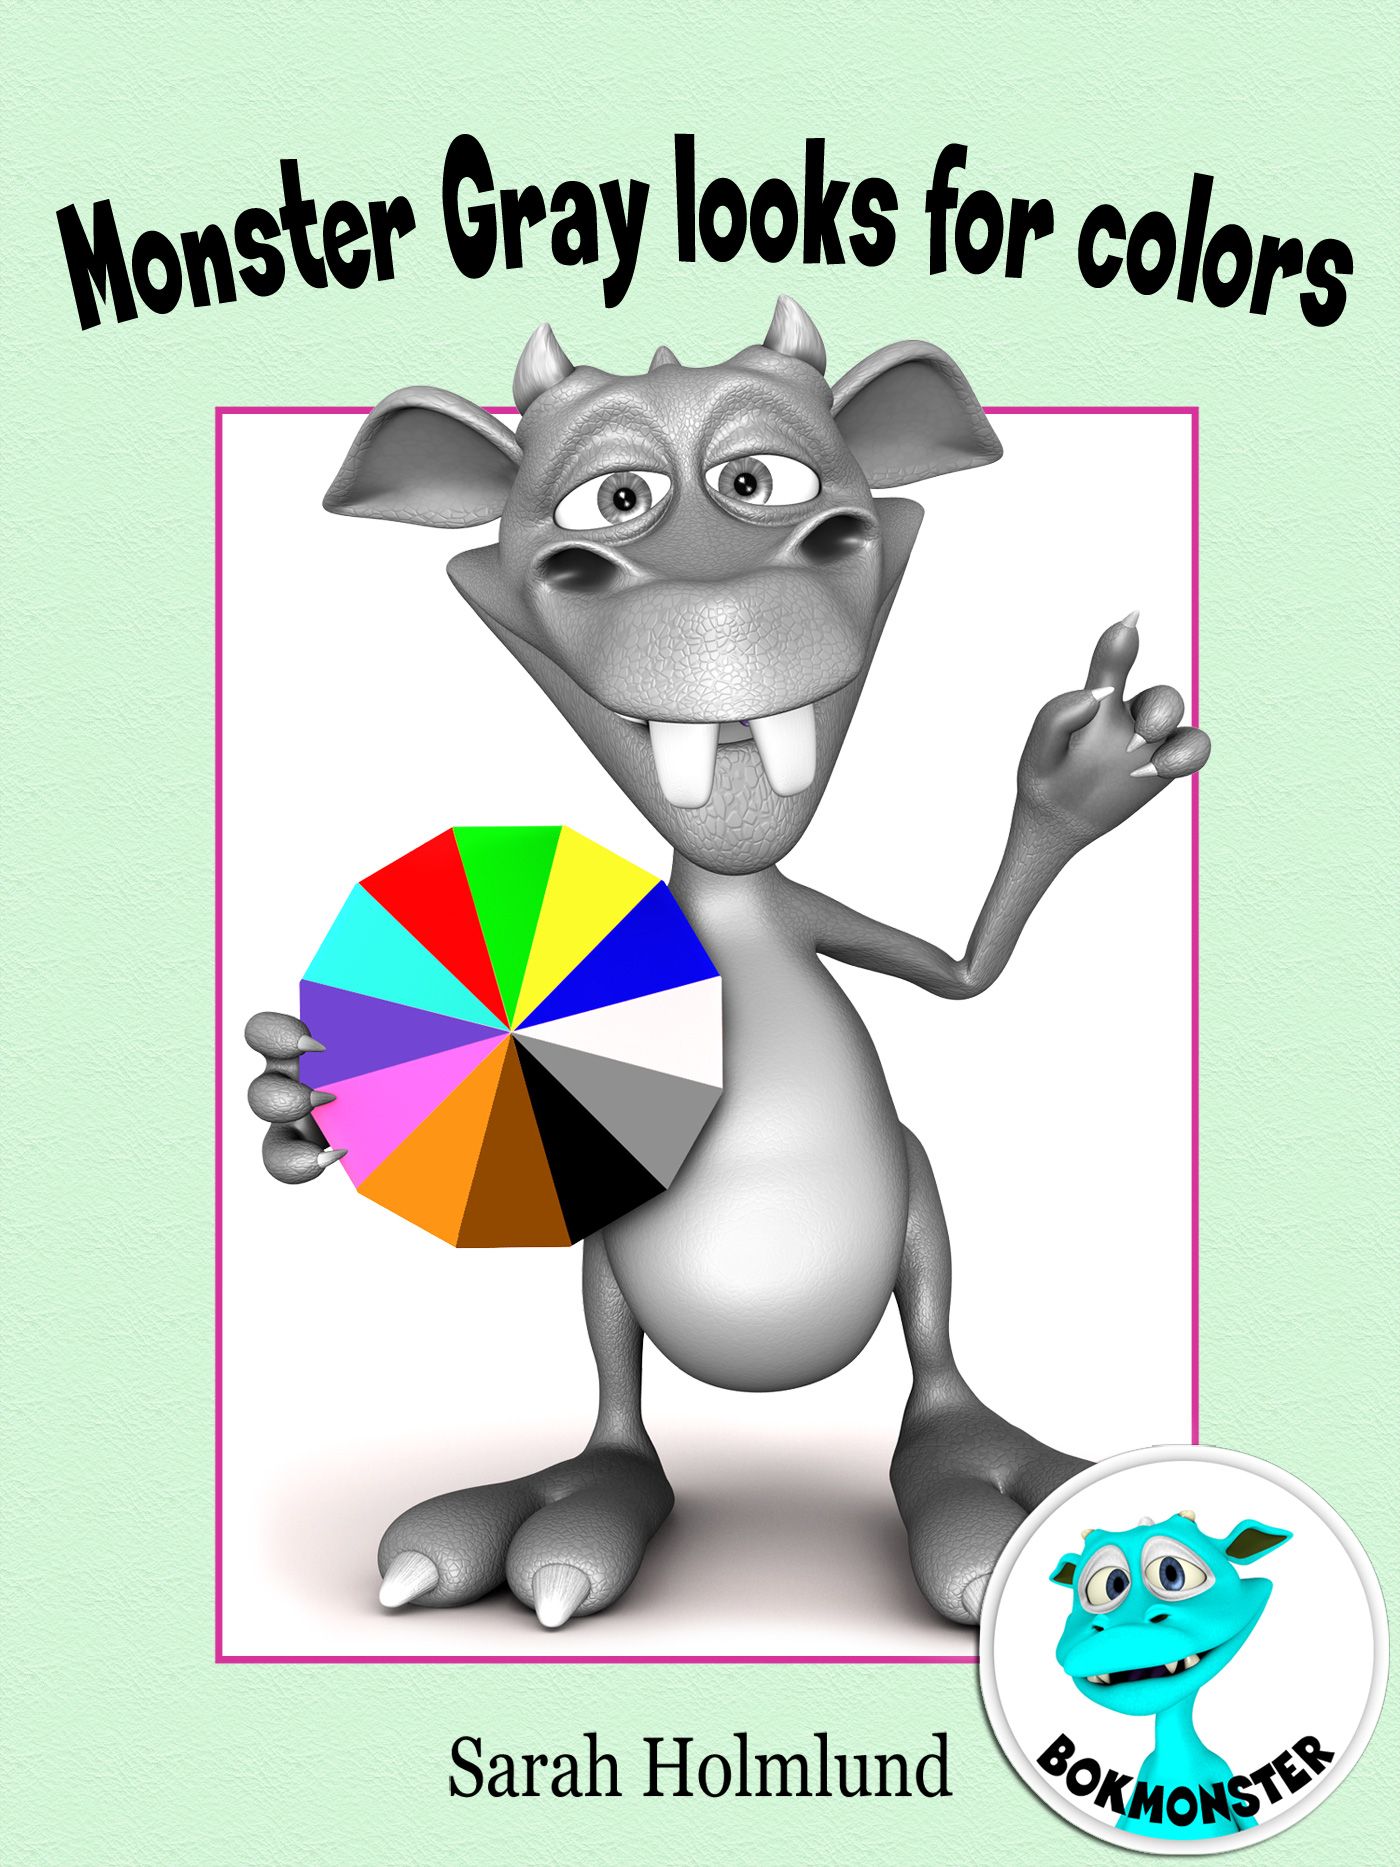 Monster Gray looks for colors! An illustrated children's book about colors, eBook by Sarah Holmlund